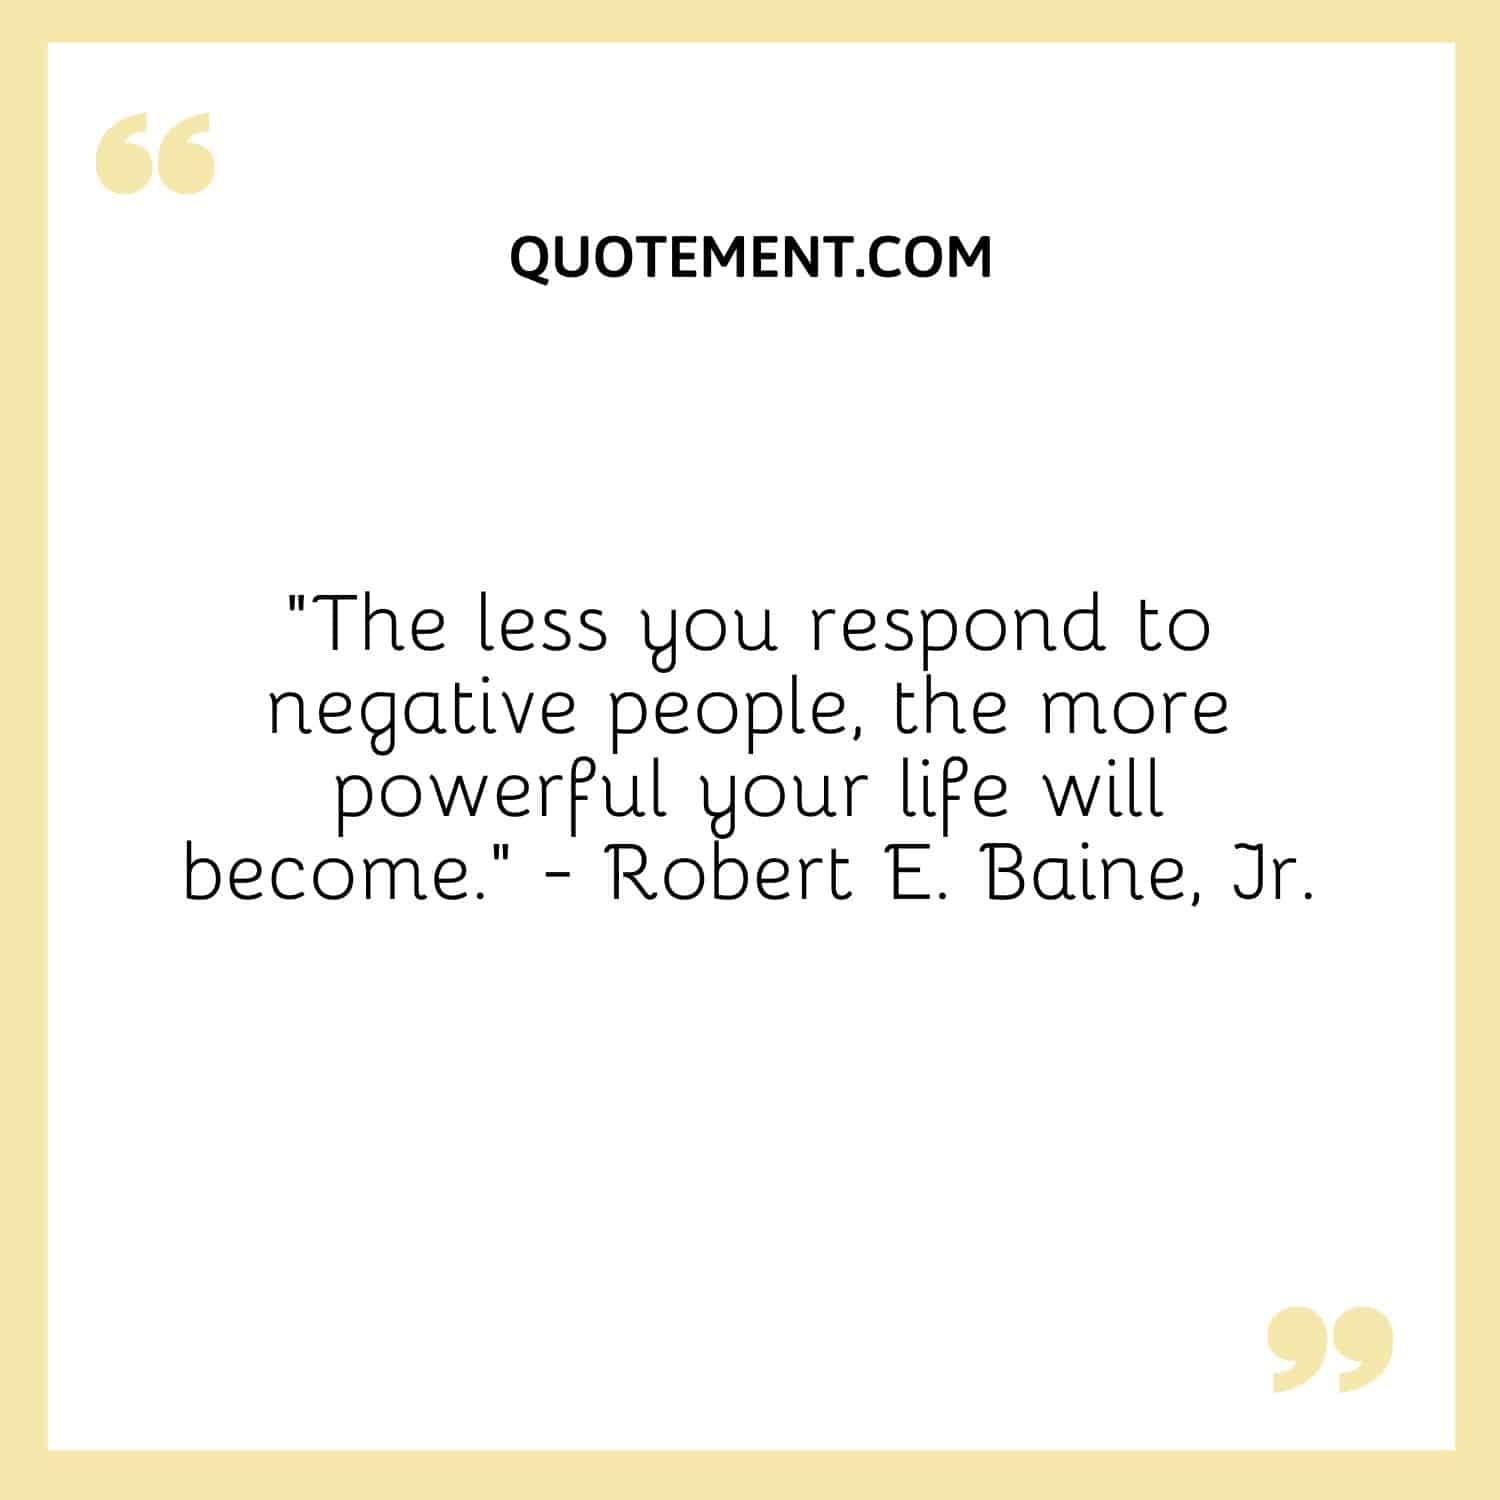 “The less you respond to negative people, the more powerful your life will become.” - Robert E. Baine, Jr.